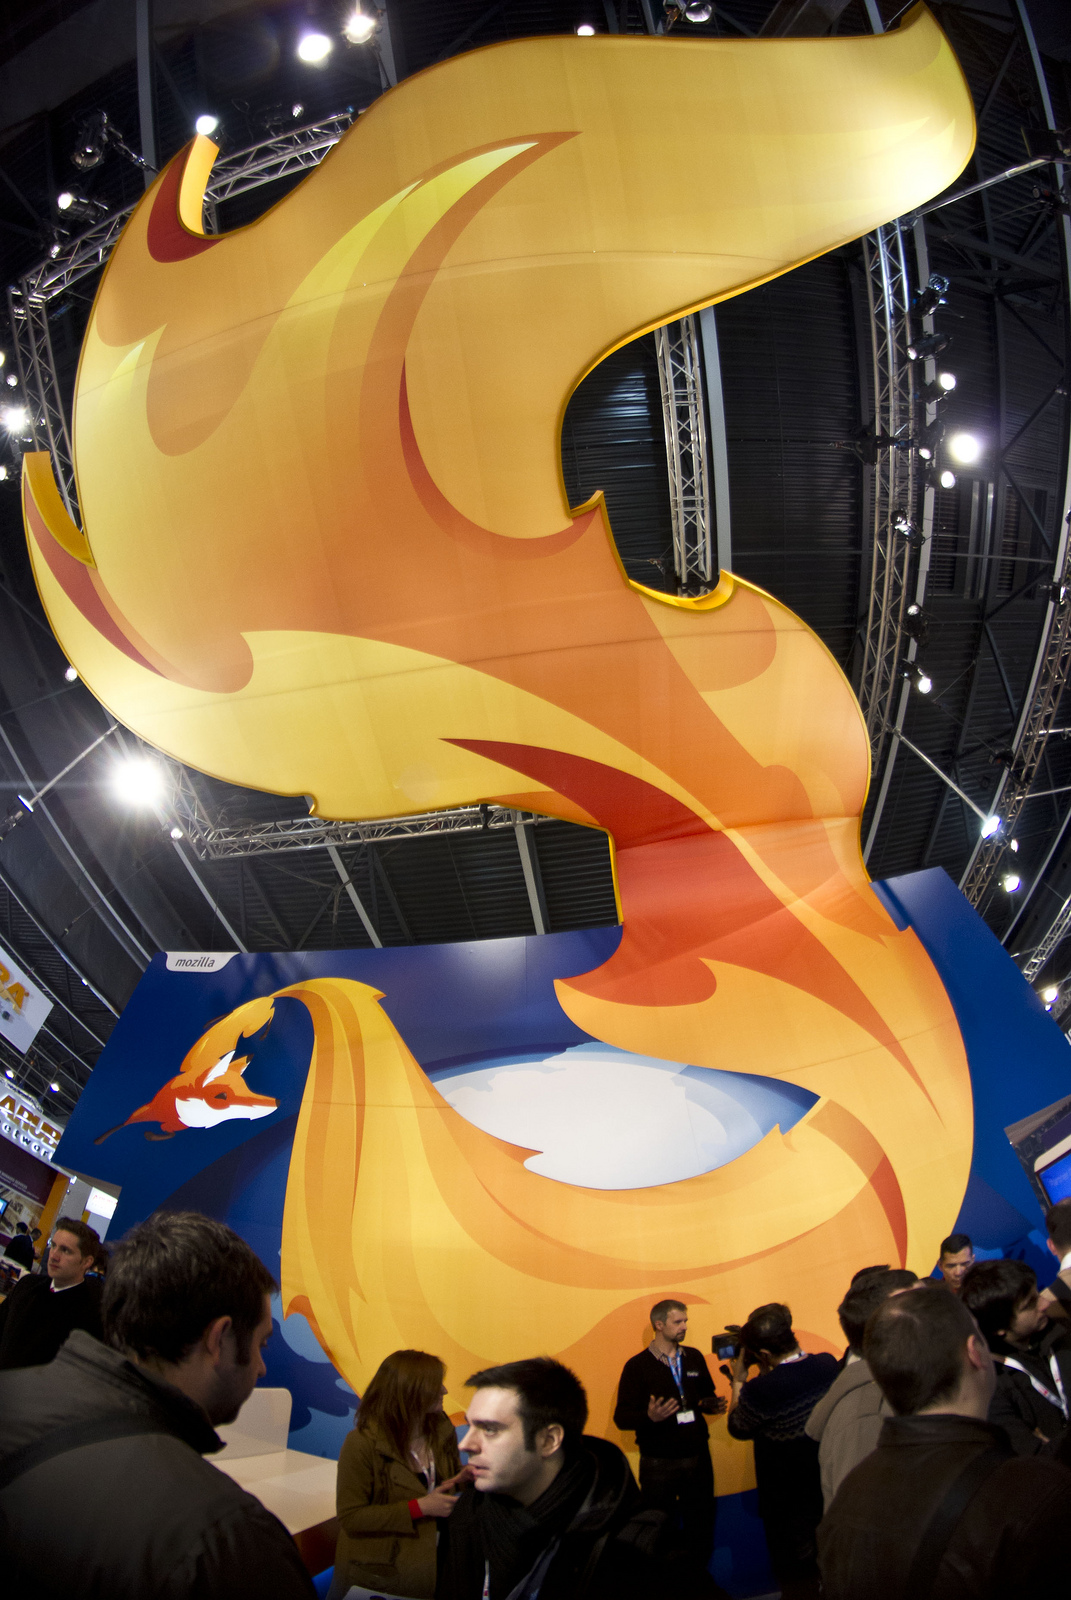 how to download and install mozilla firefox 2.0